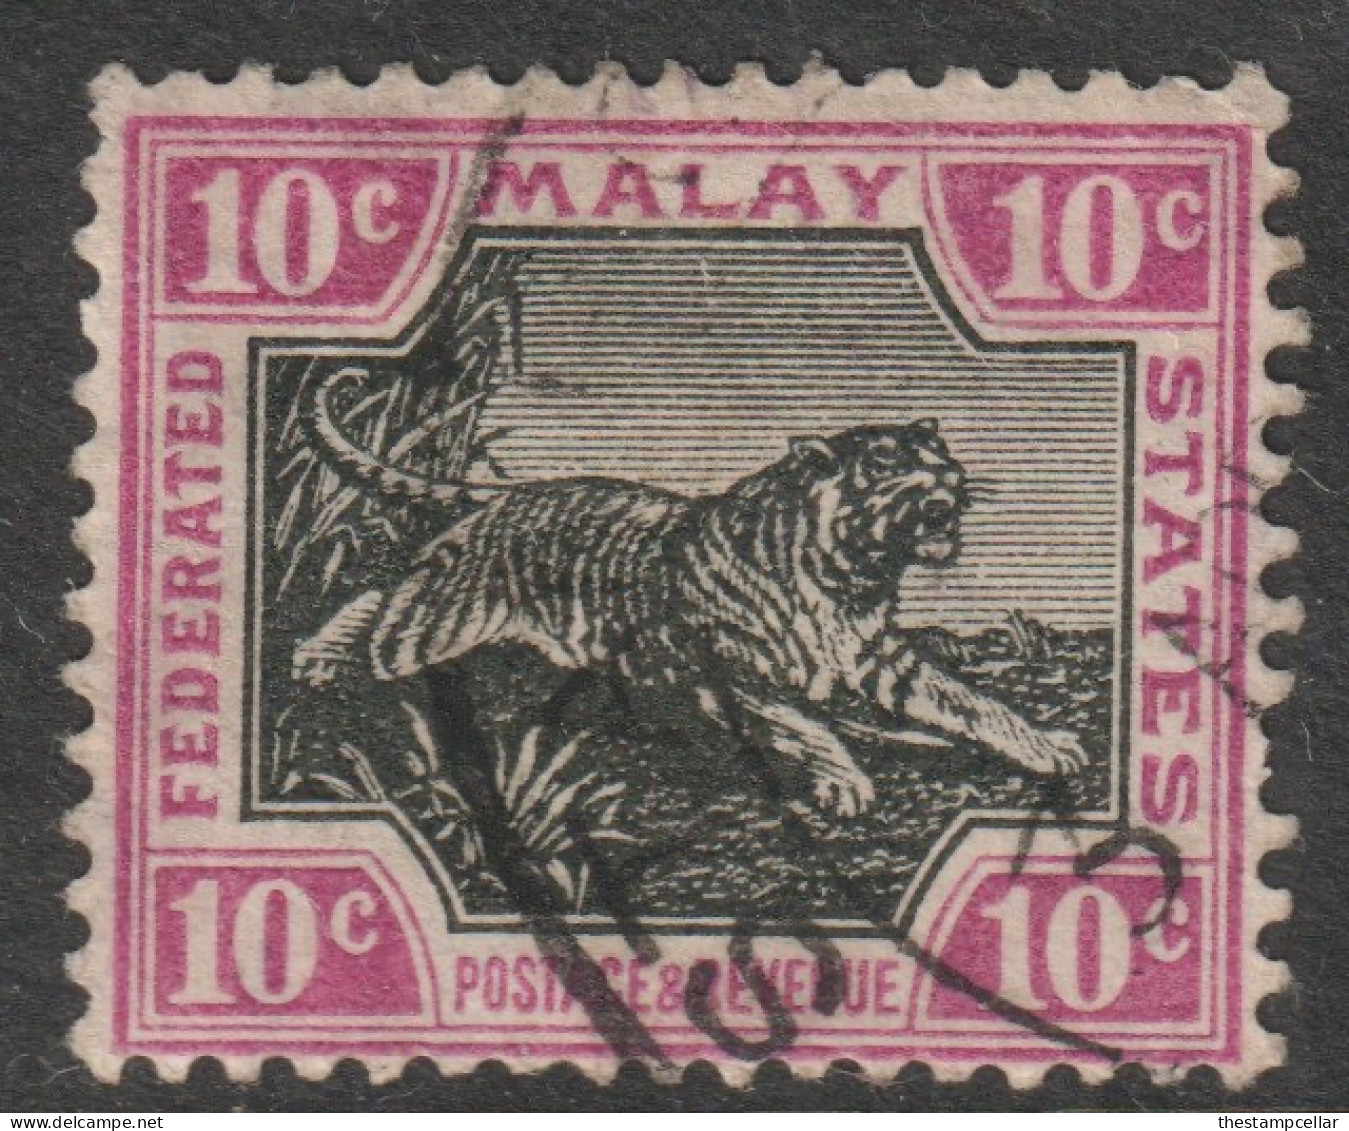 Malaya Federated States FMS Scott 31 - SG43, 1904 Leaping Tiger 10c Used - Federated Malay States